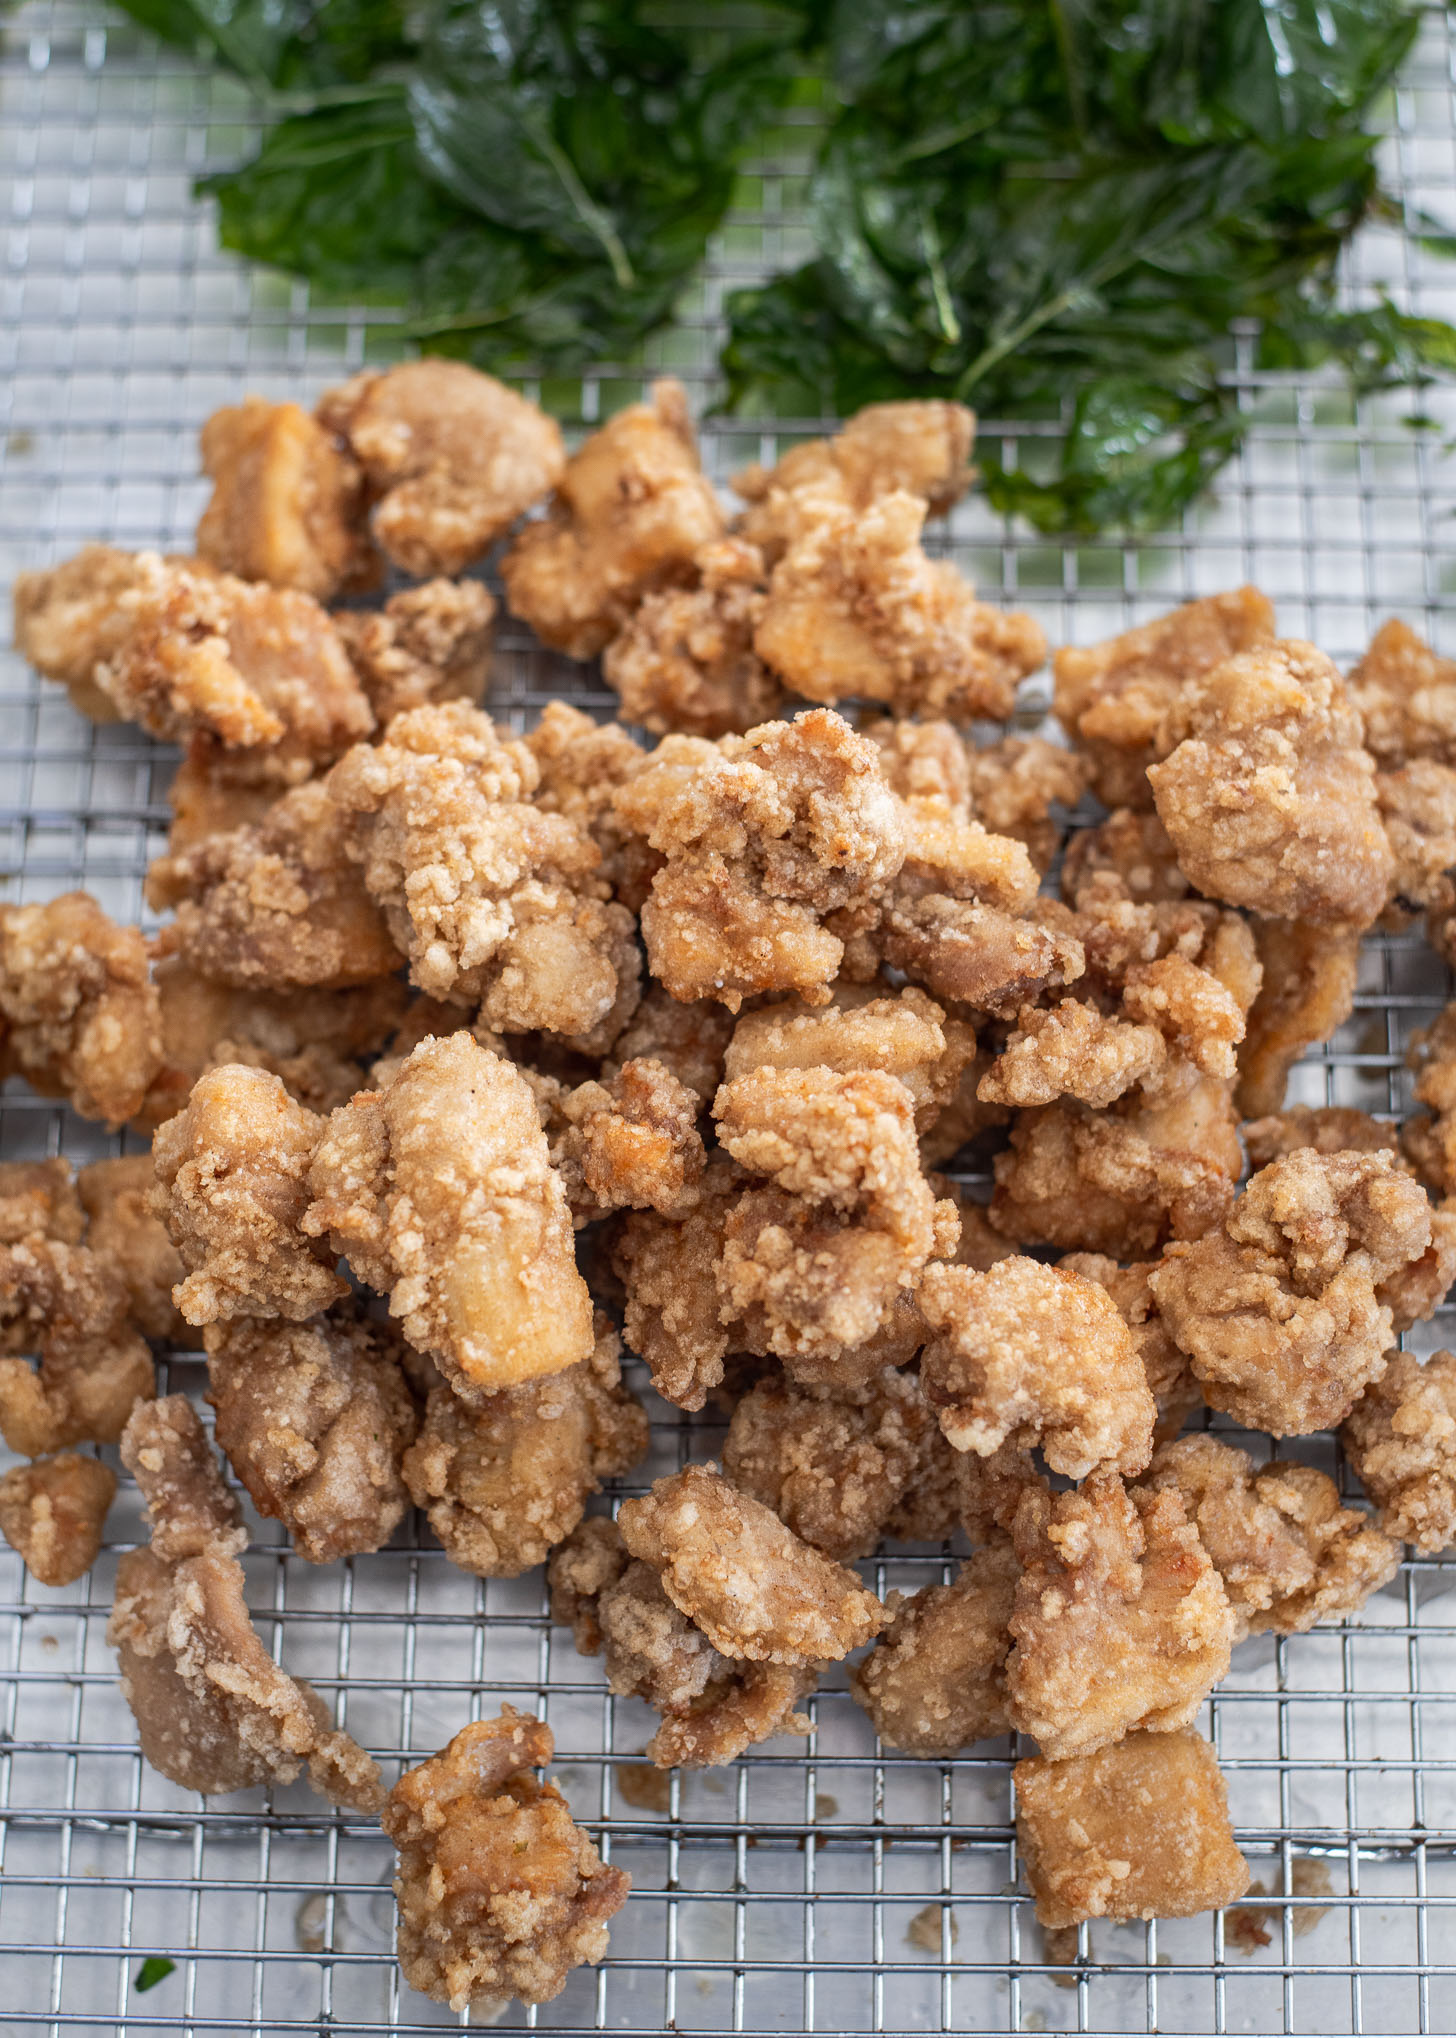 Double deep-fried and golden brown chicken pieces showing crunchy texture.